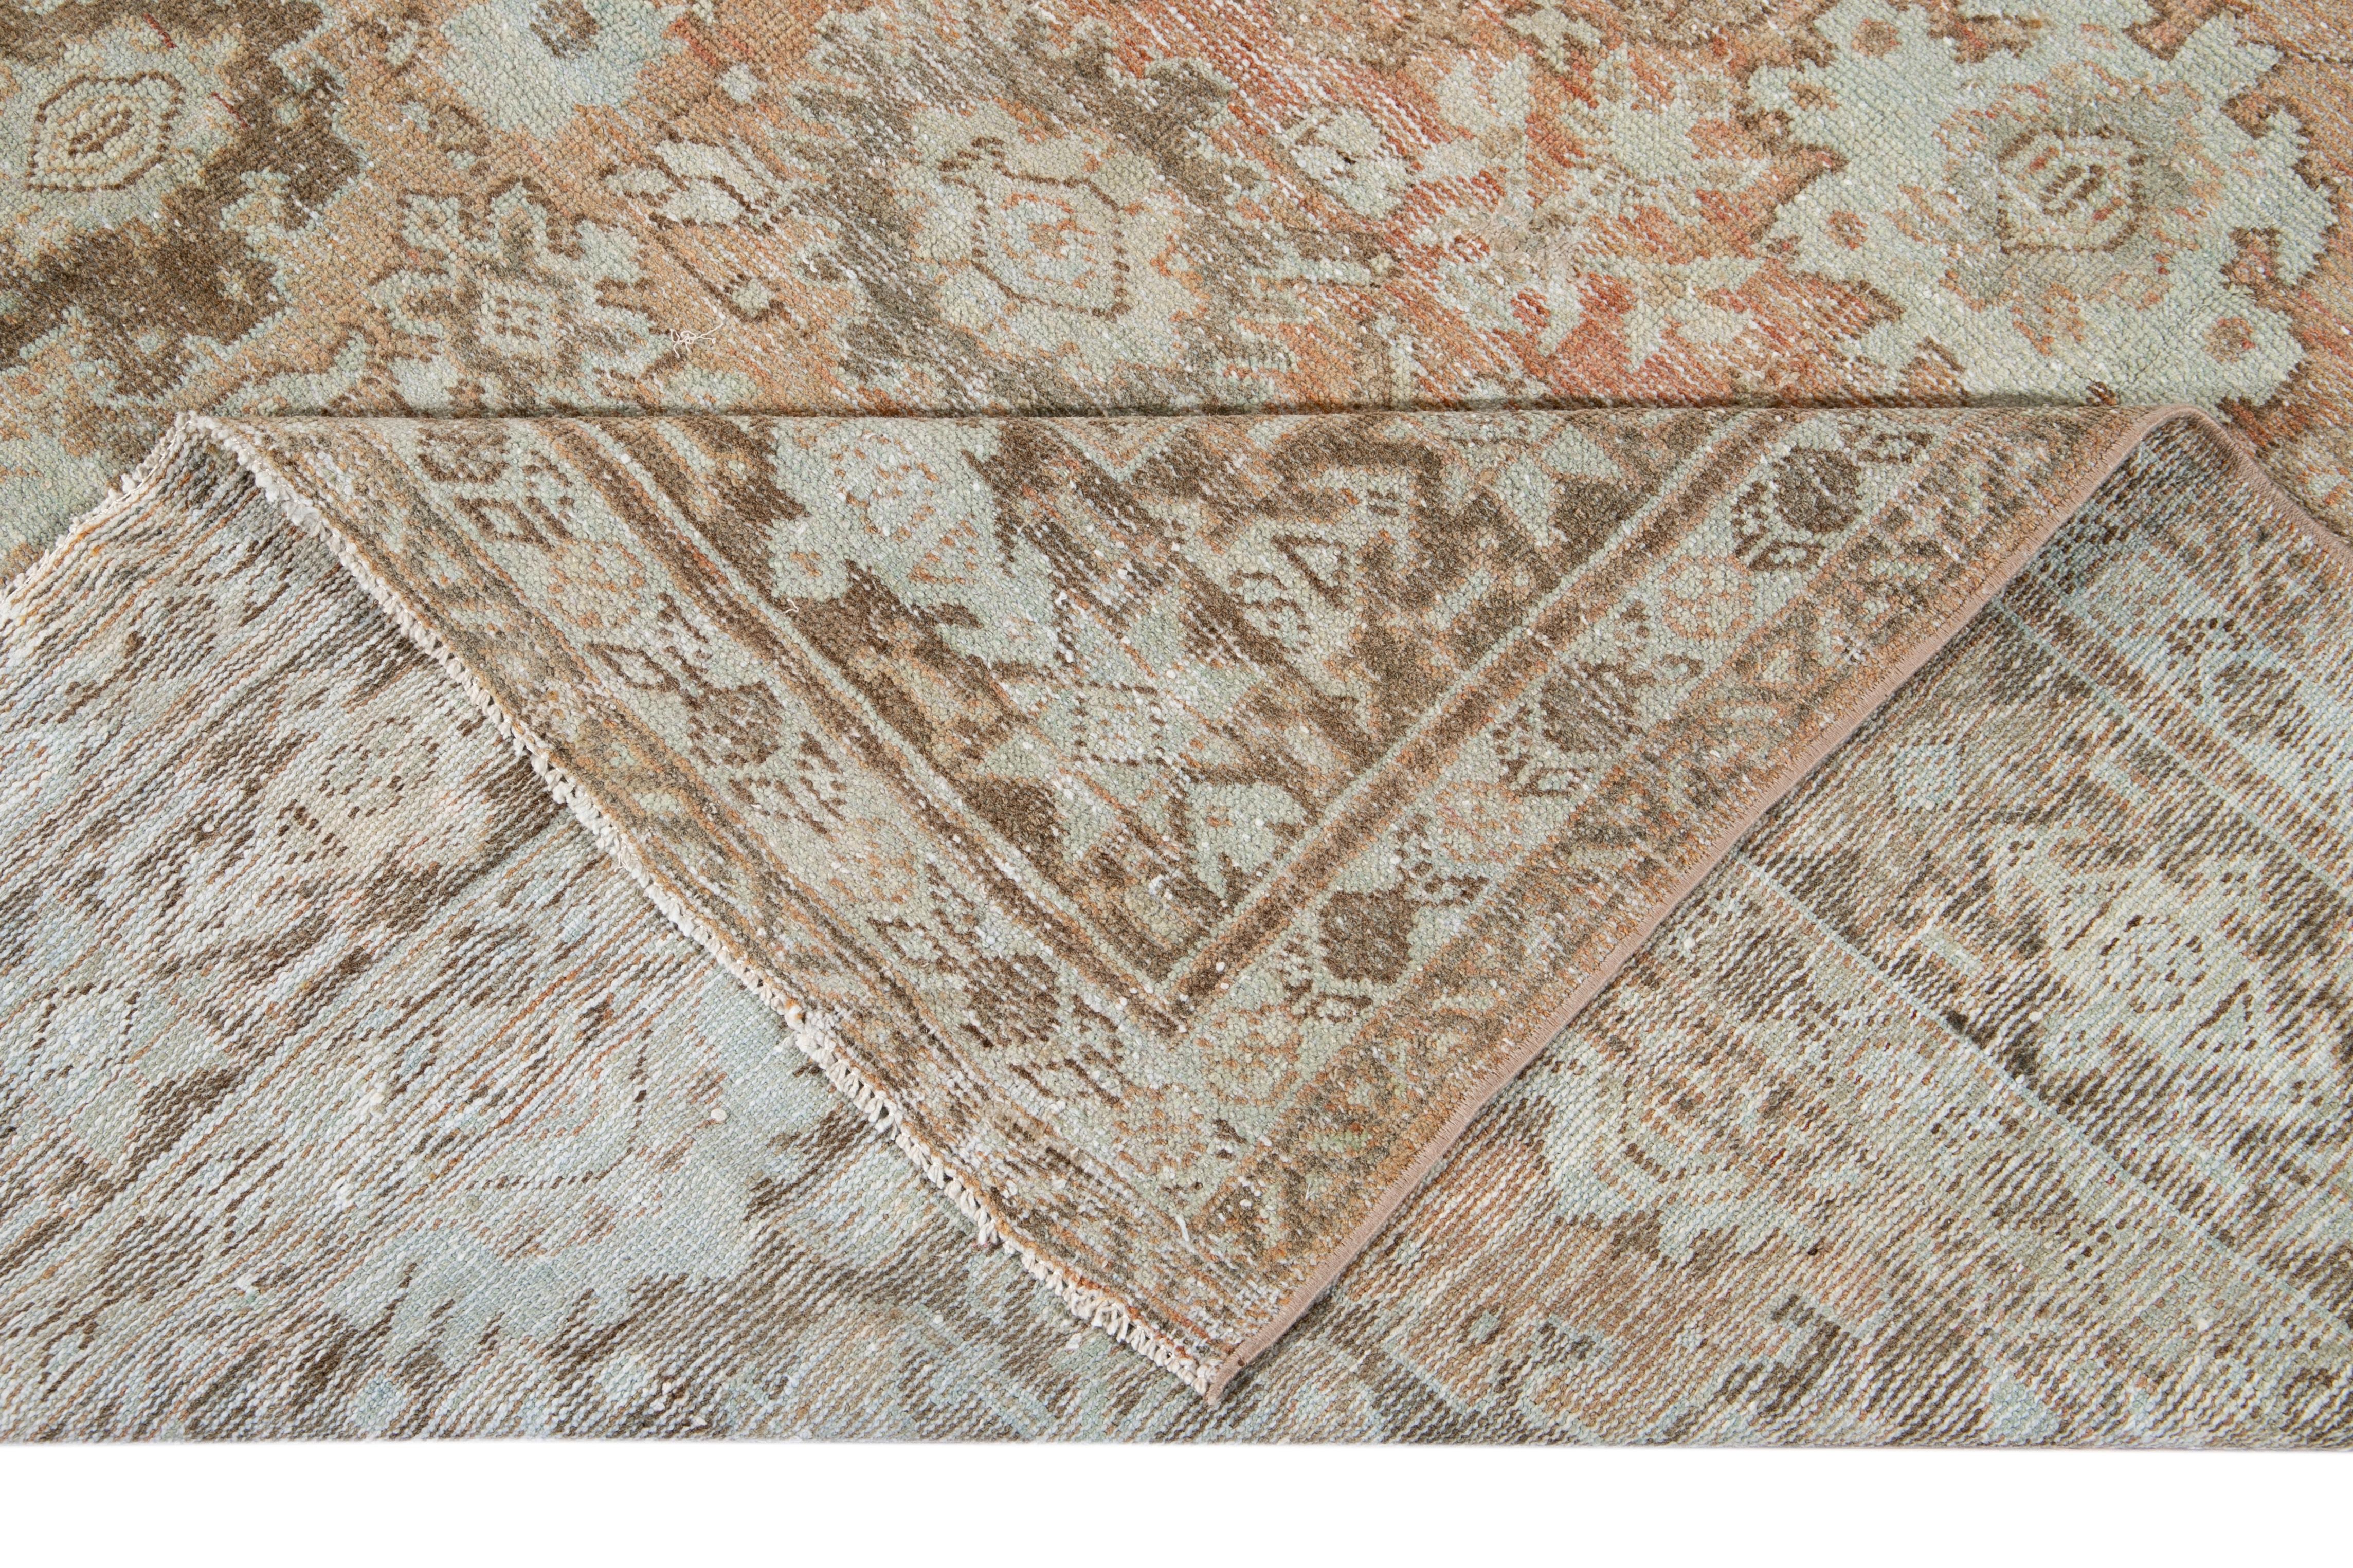 Beautiful hand-knotted antique mahal wool rug with the orange rust field. This Persian rug has a brown featuring a traditional all-over floral shabby chic design. 

This rug measures 8'1'' x 10'.